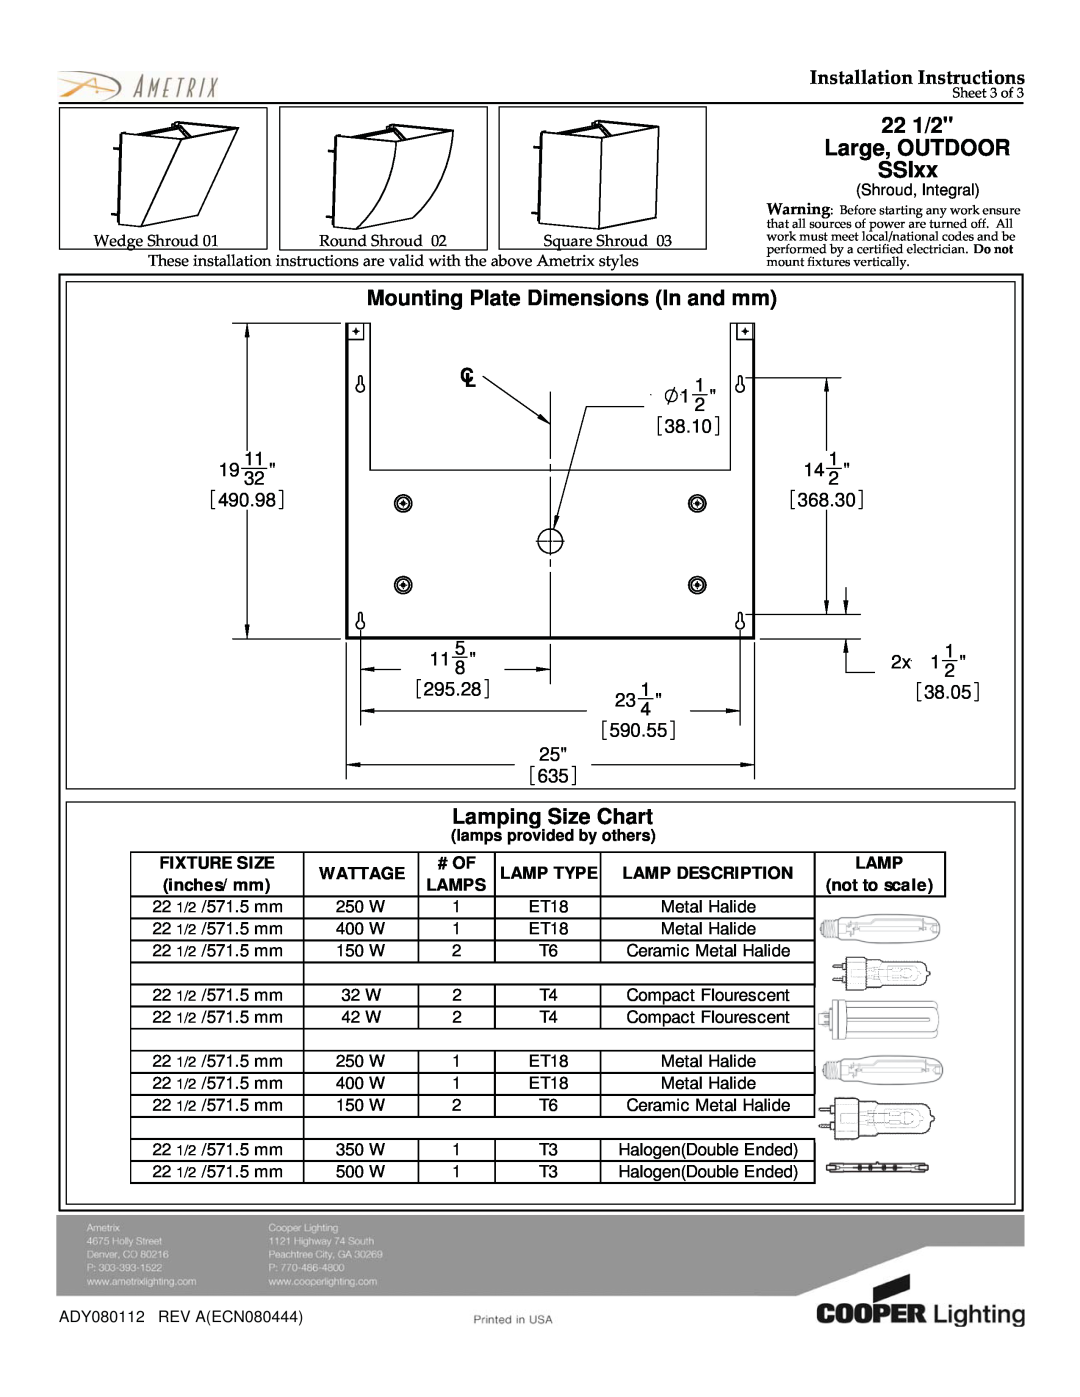 Cooper Lighting ADY080112 dimensions 221/2 Large, OUTDOOR SSIxx, Mounting Plate Dimensions In and mm, Lamping Size Chart 